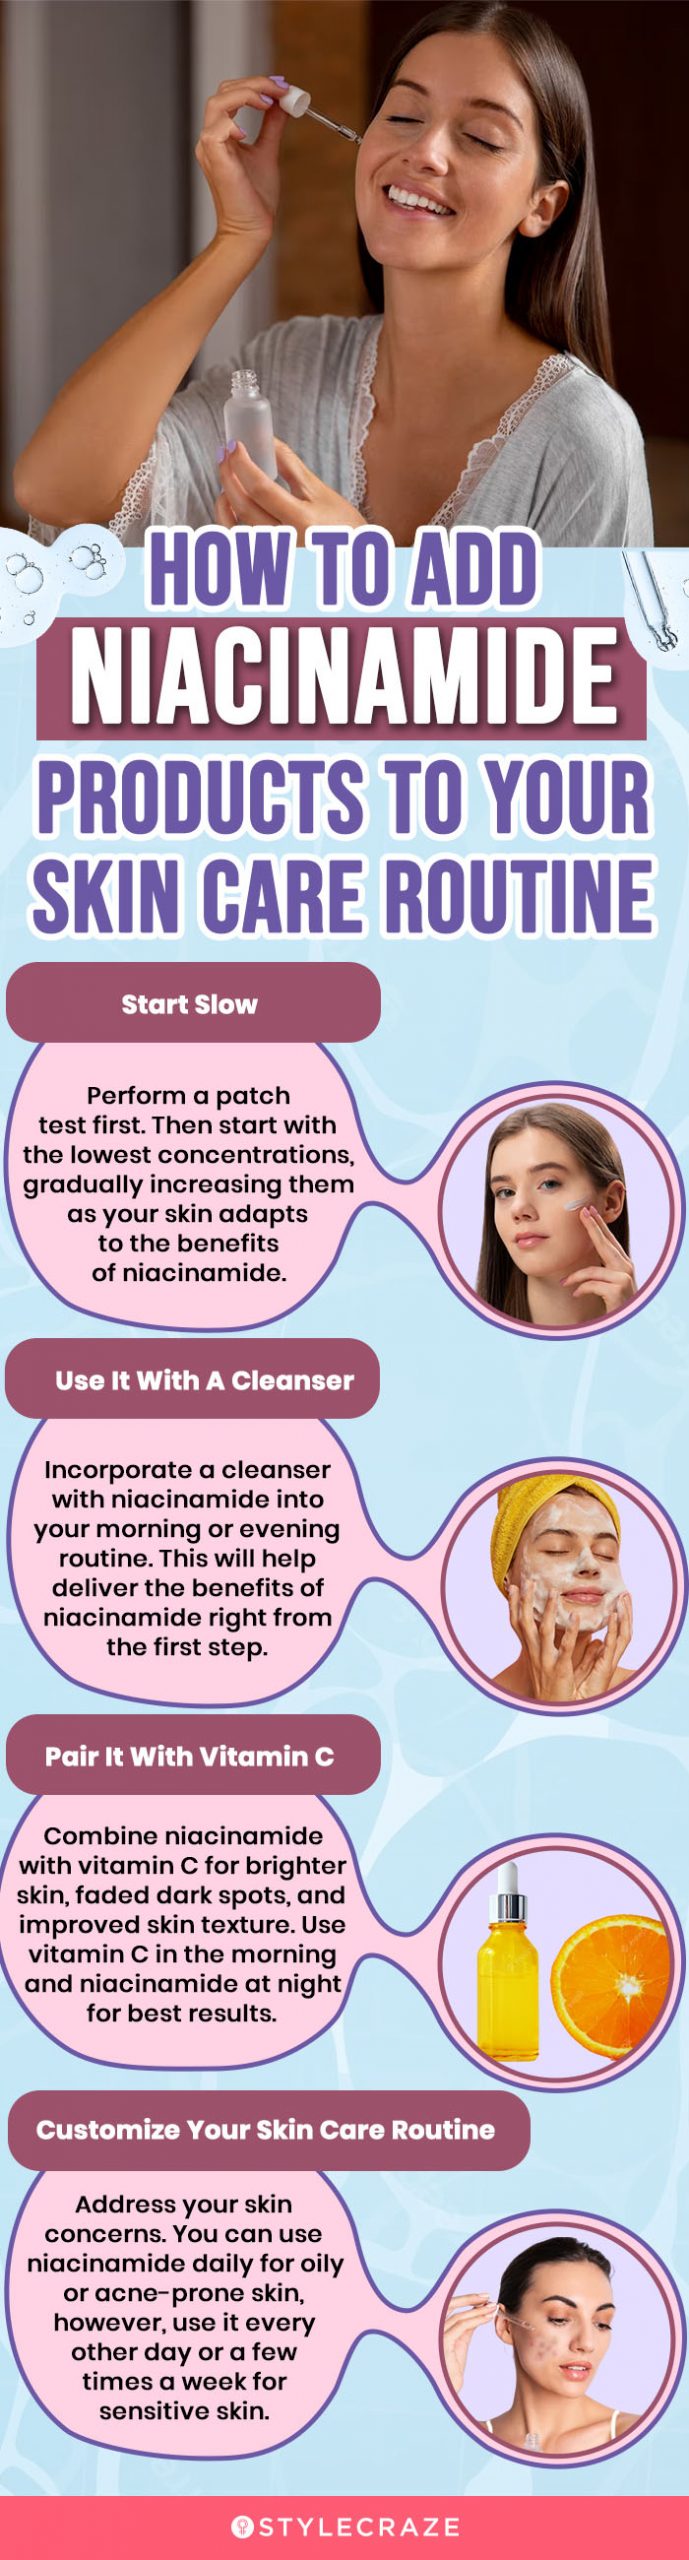 How To Add Niacinamide Products To Your Skin Care Routine (infographic)